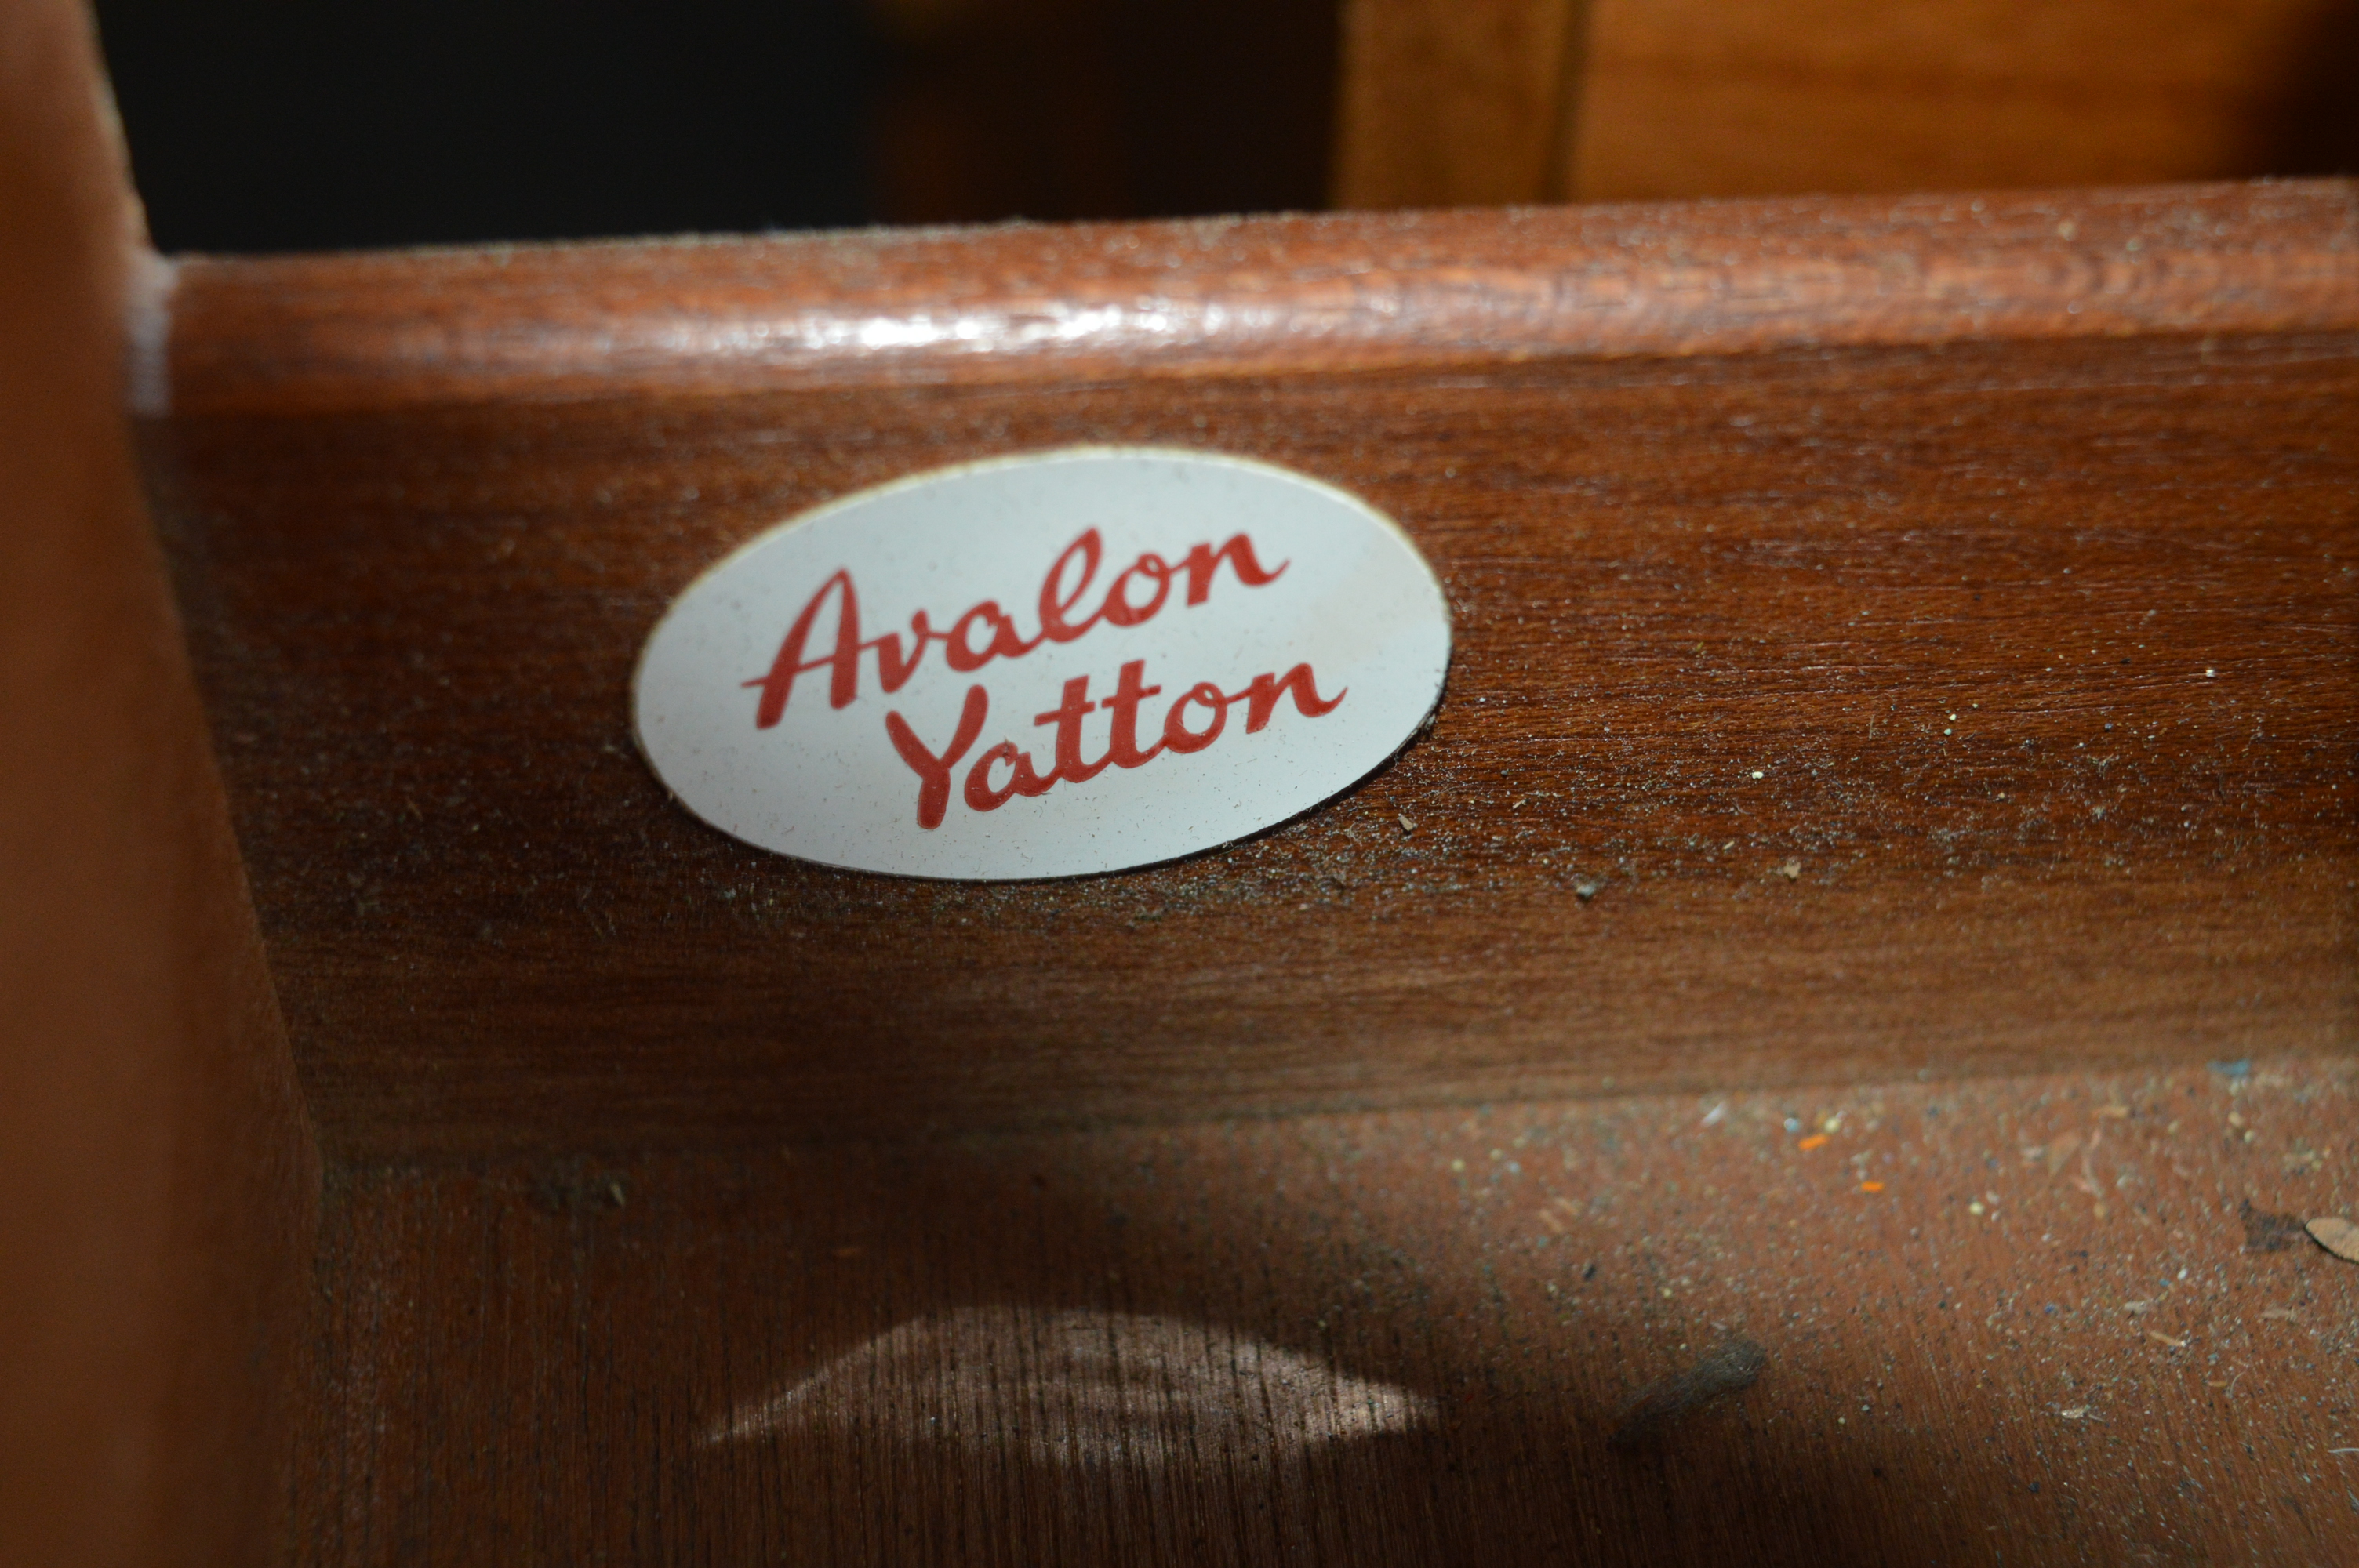 Retro Teak Chest of Drawer by Avalon of Yatton - Image 2 of 2